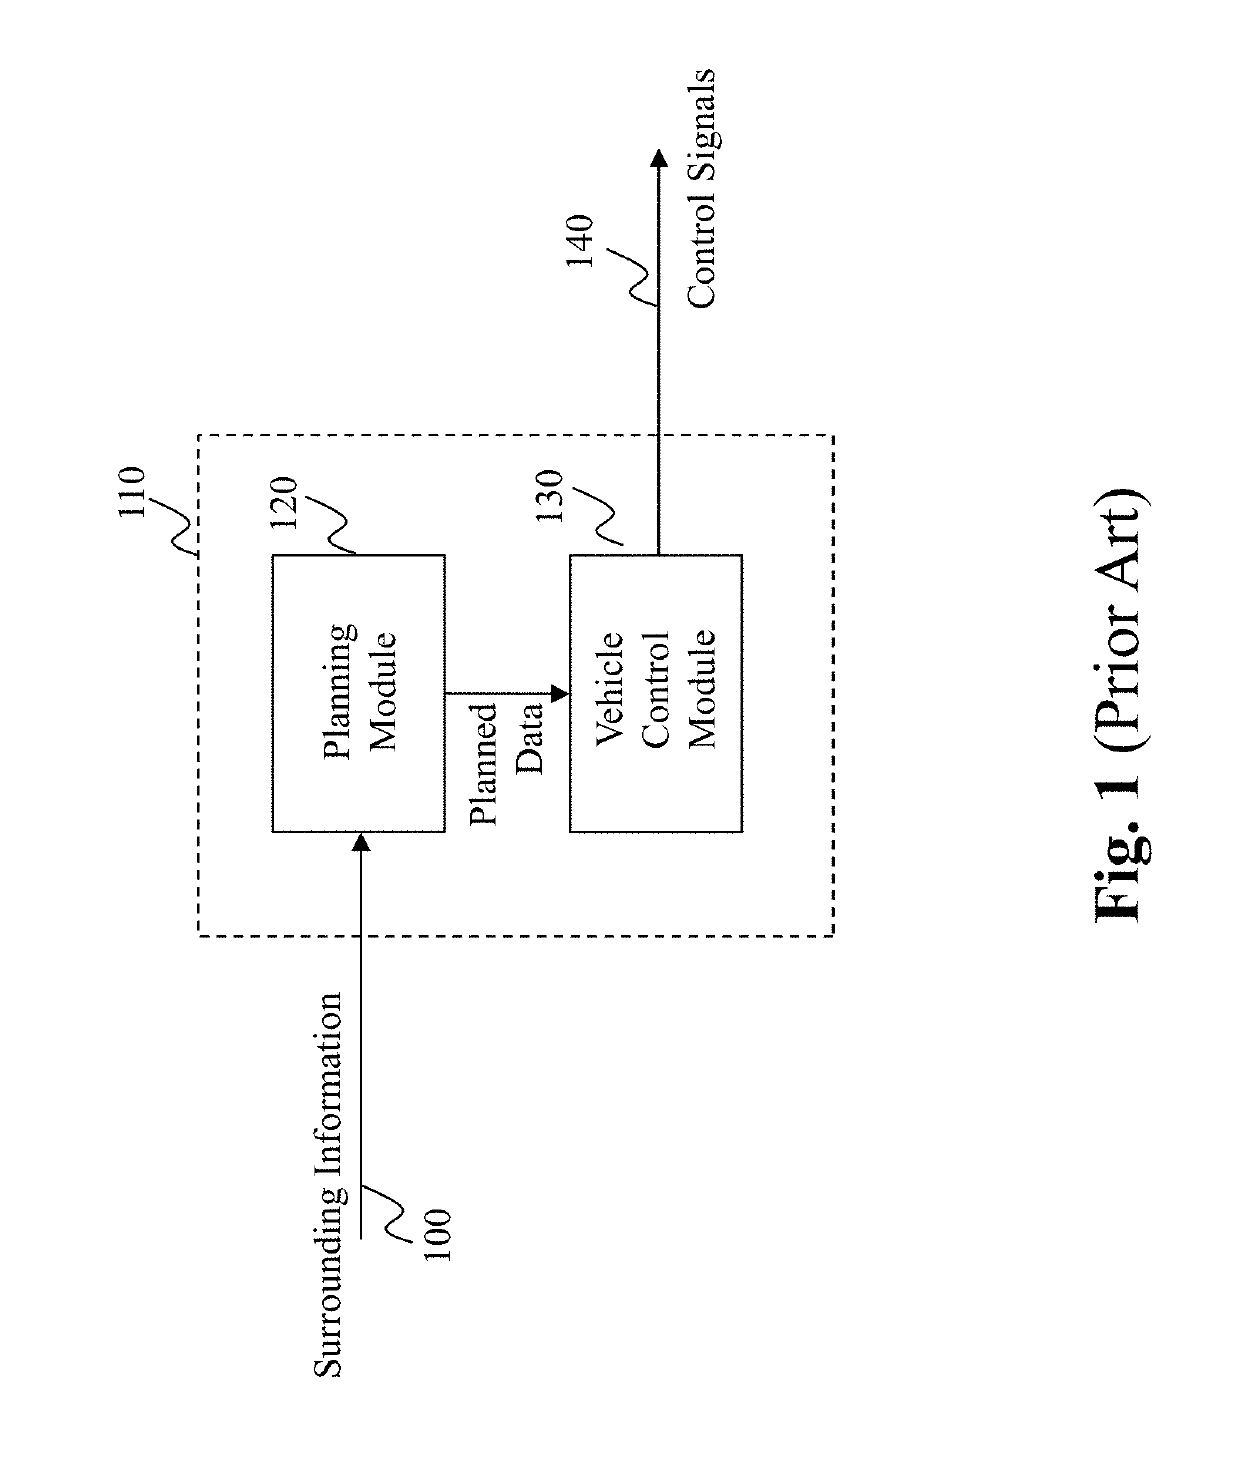 Method and system for human-like vehicle control prediction in autonomous driving vehicles